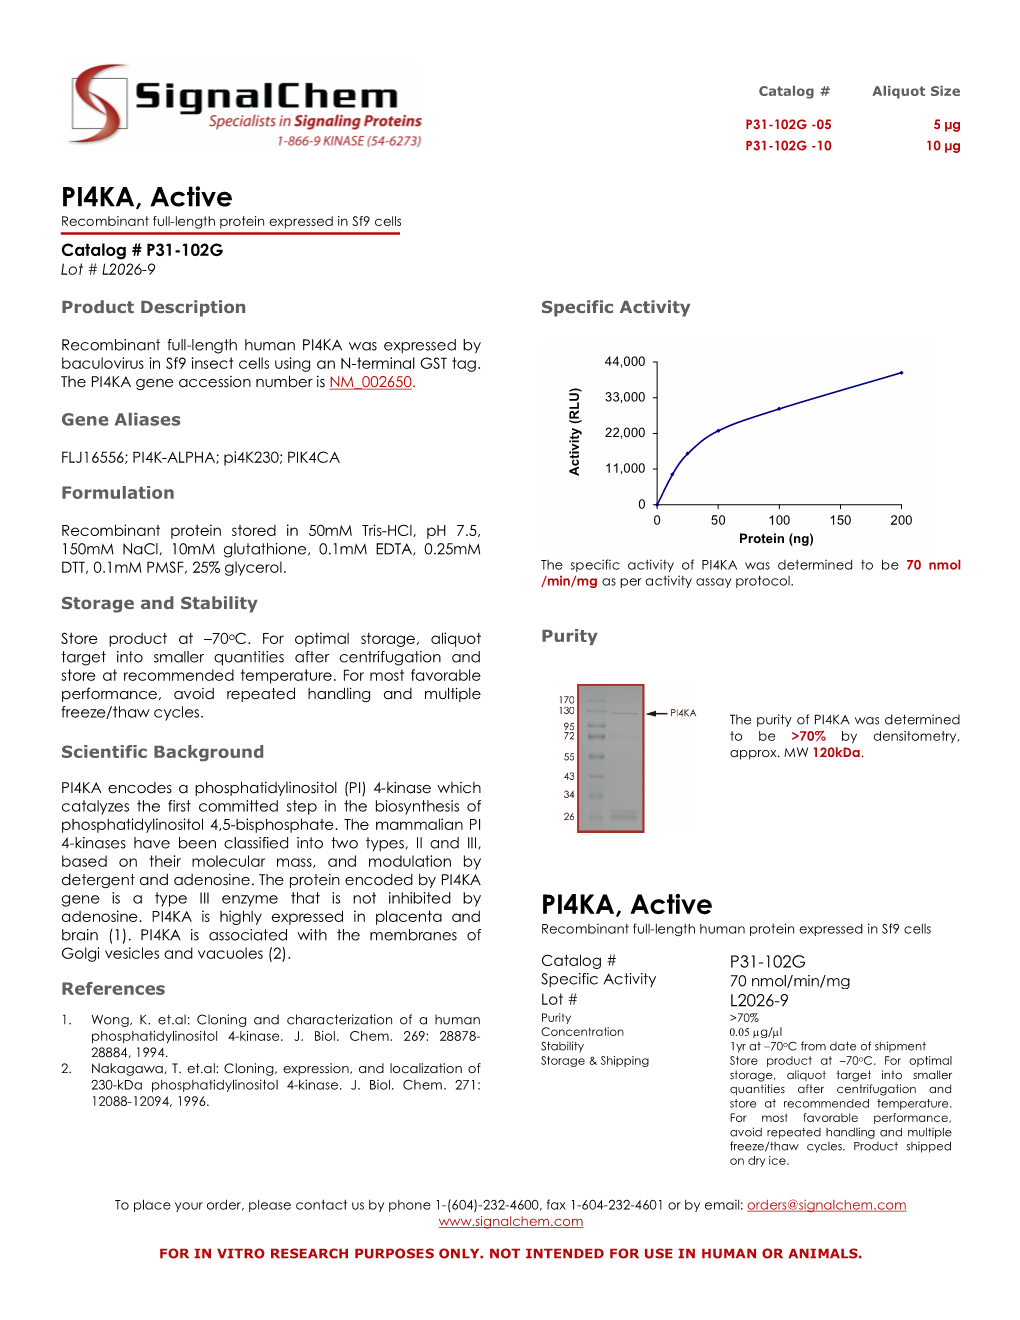 PI4KA, Active Recombinant Full-Length Protein Expressed in Sf9 Cells